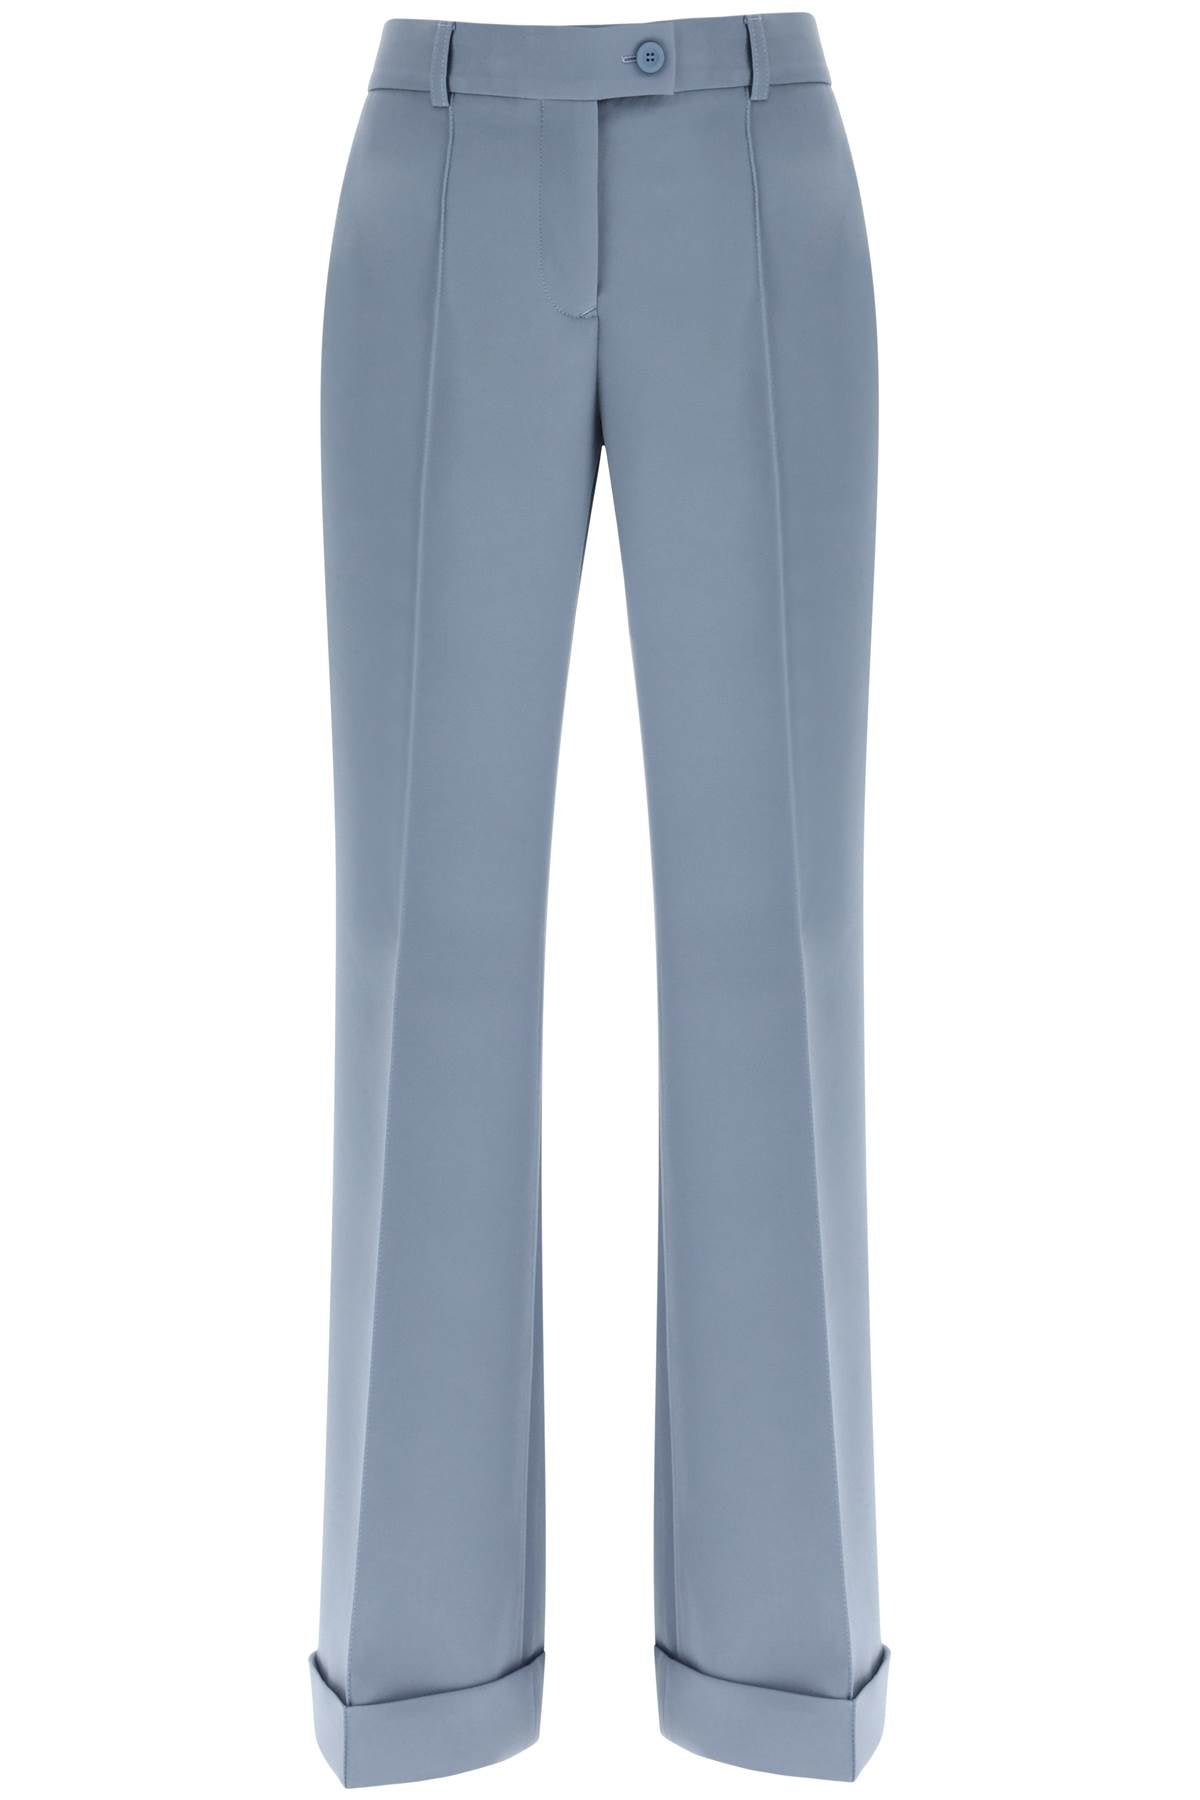 Acne studios flared tailored pants AK0644 DUSTY BLUE